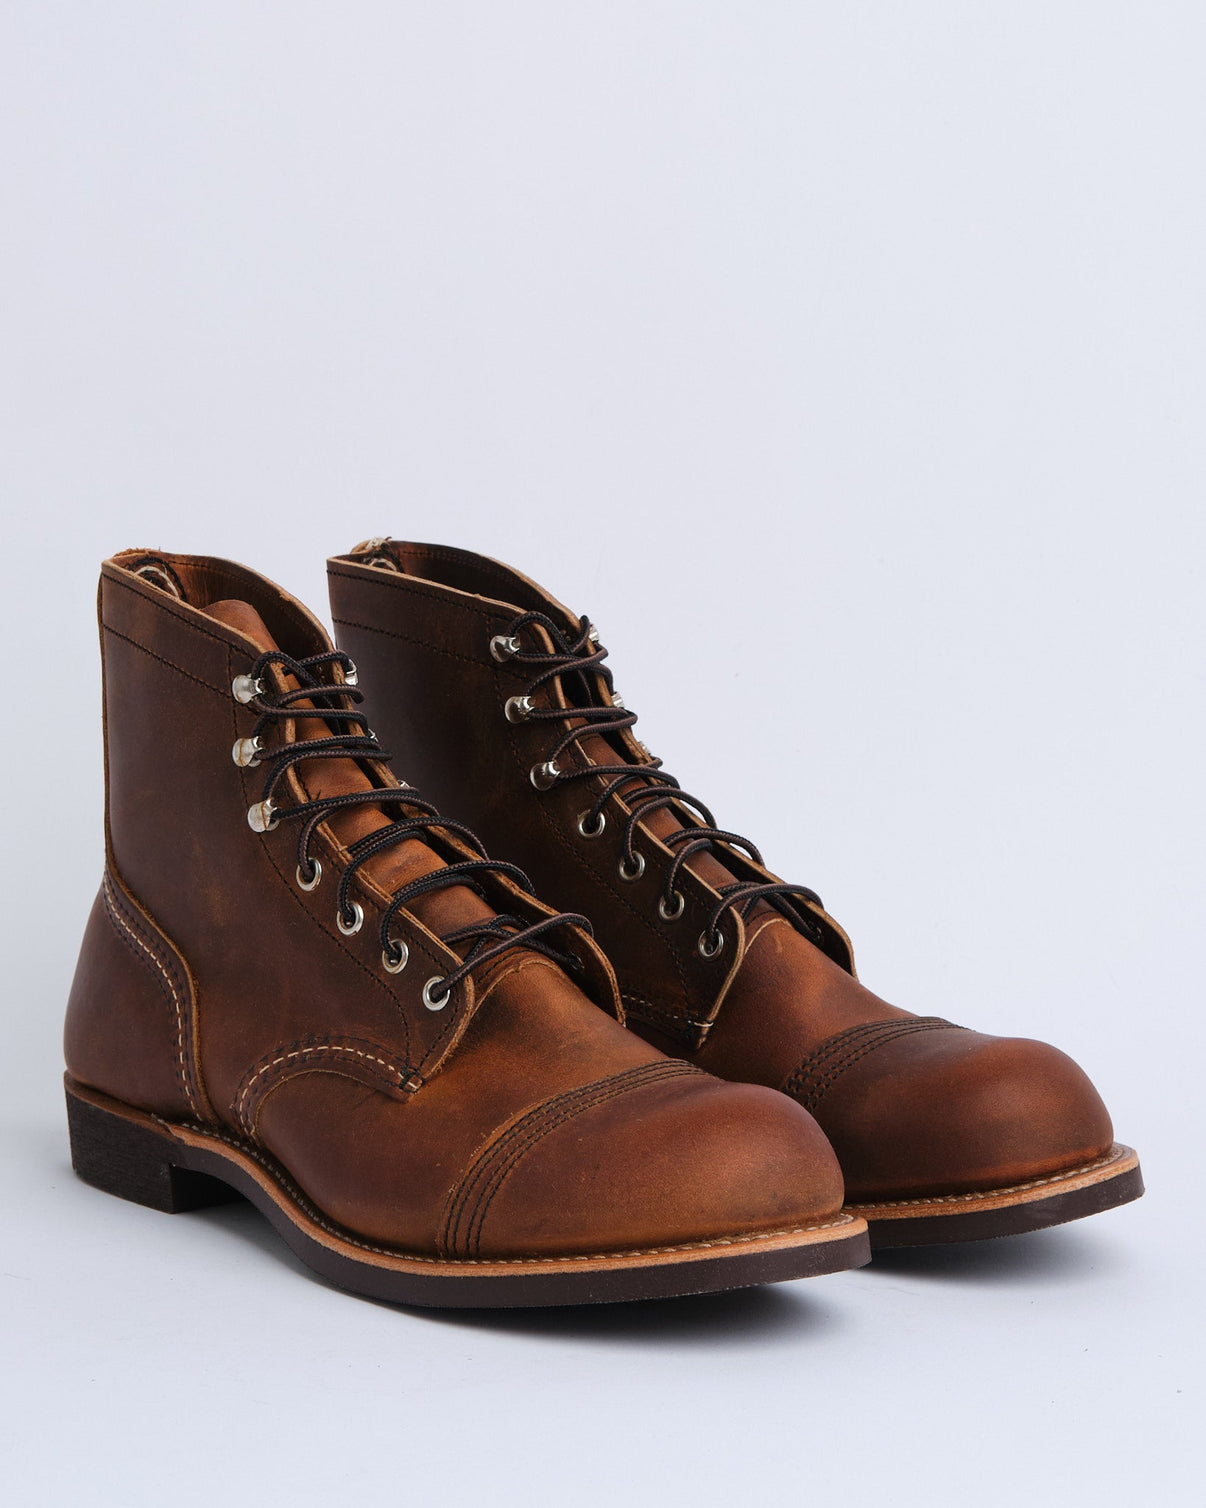 RED WING SHOES | 8085 Iron Ranger in Copper Rough & Tough | MEADOW